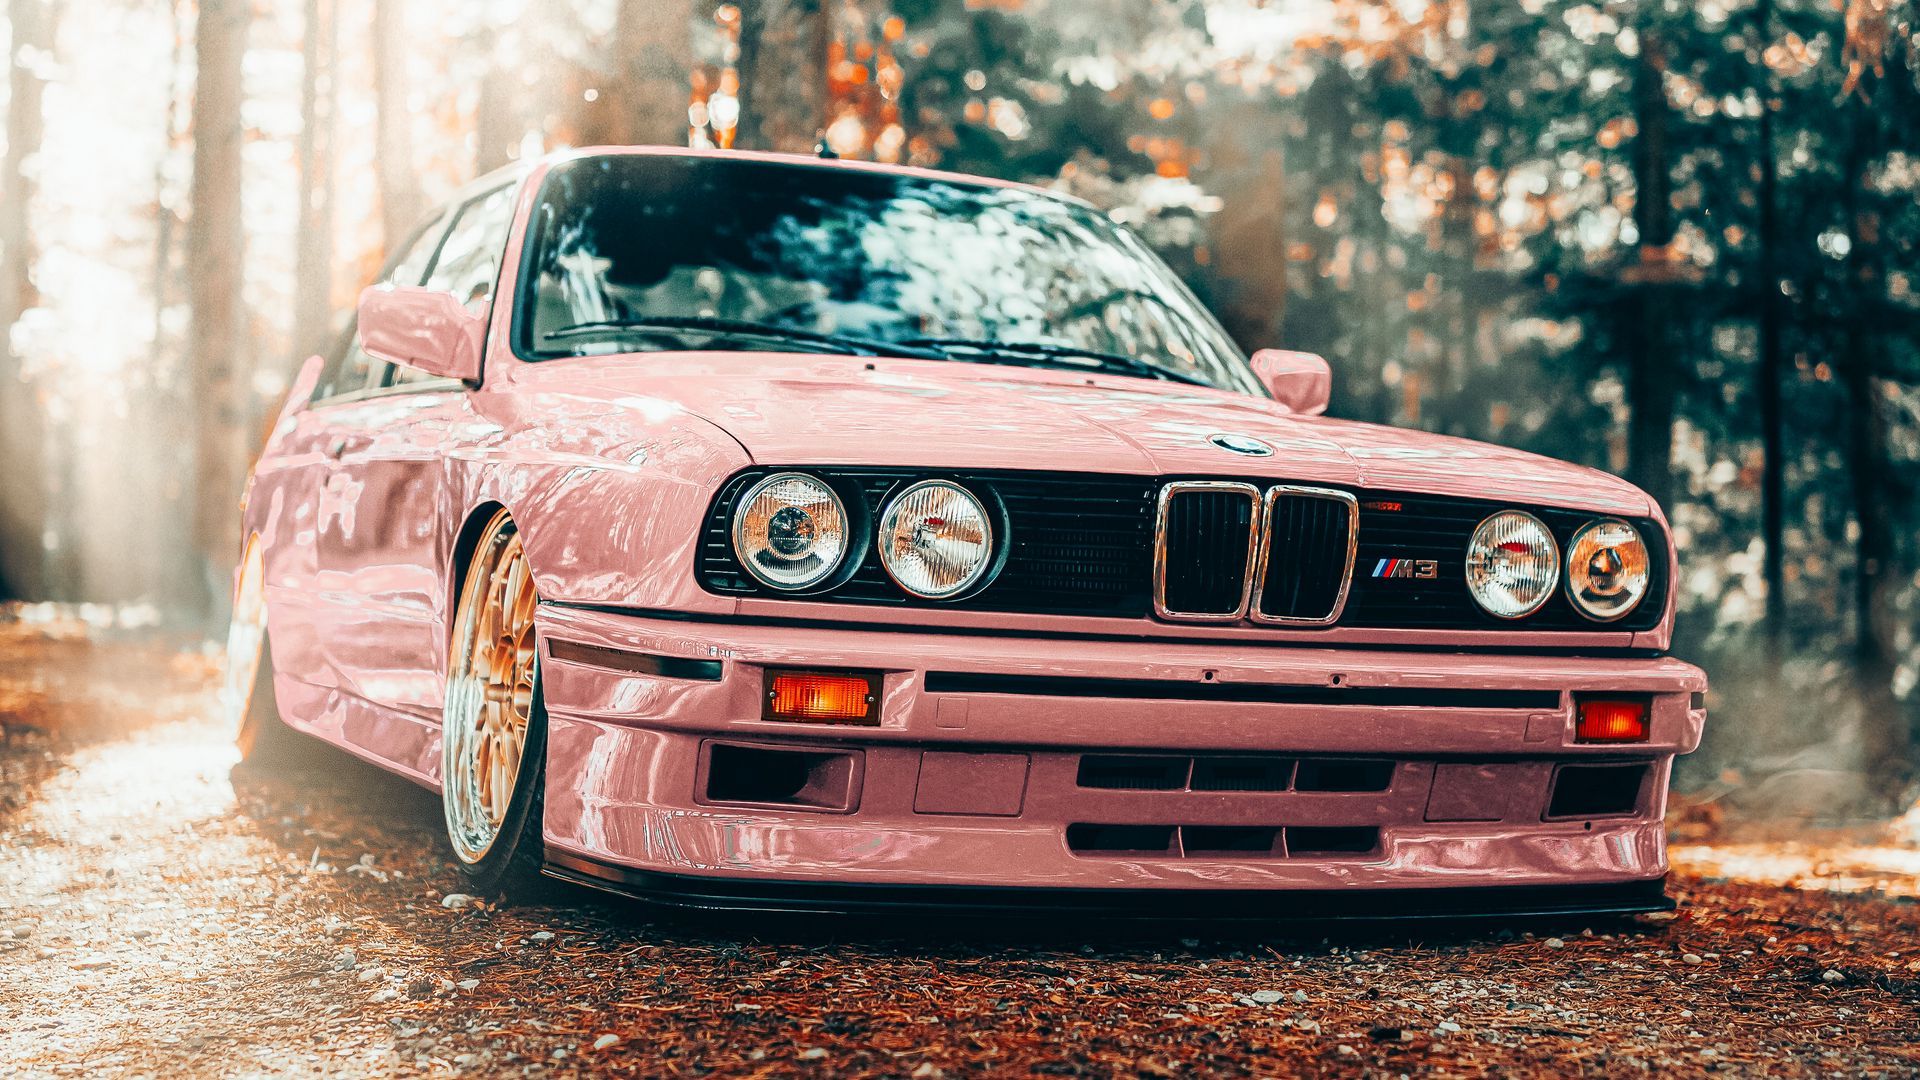 Download wallpaper 1920x1080 bmw, car, pink, tuning full hd, hdtv, fhd, 1080p HD background